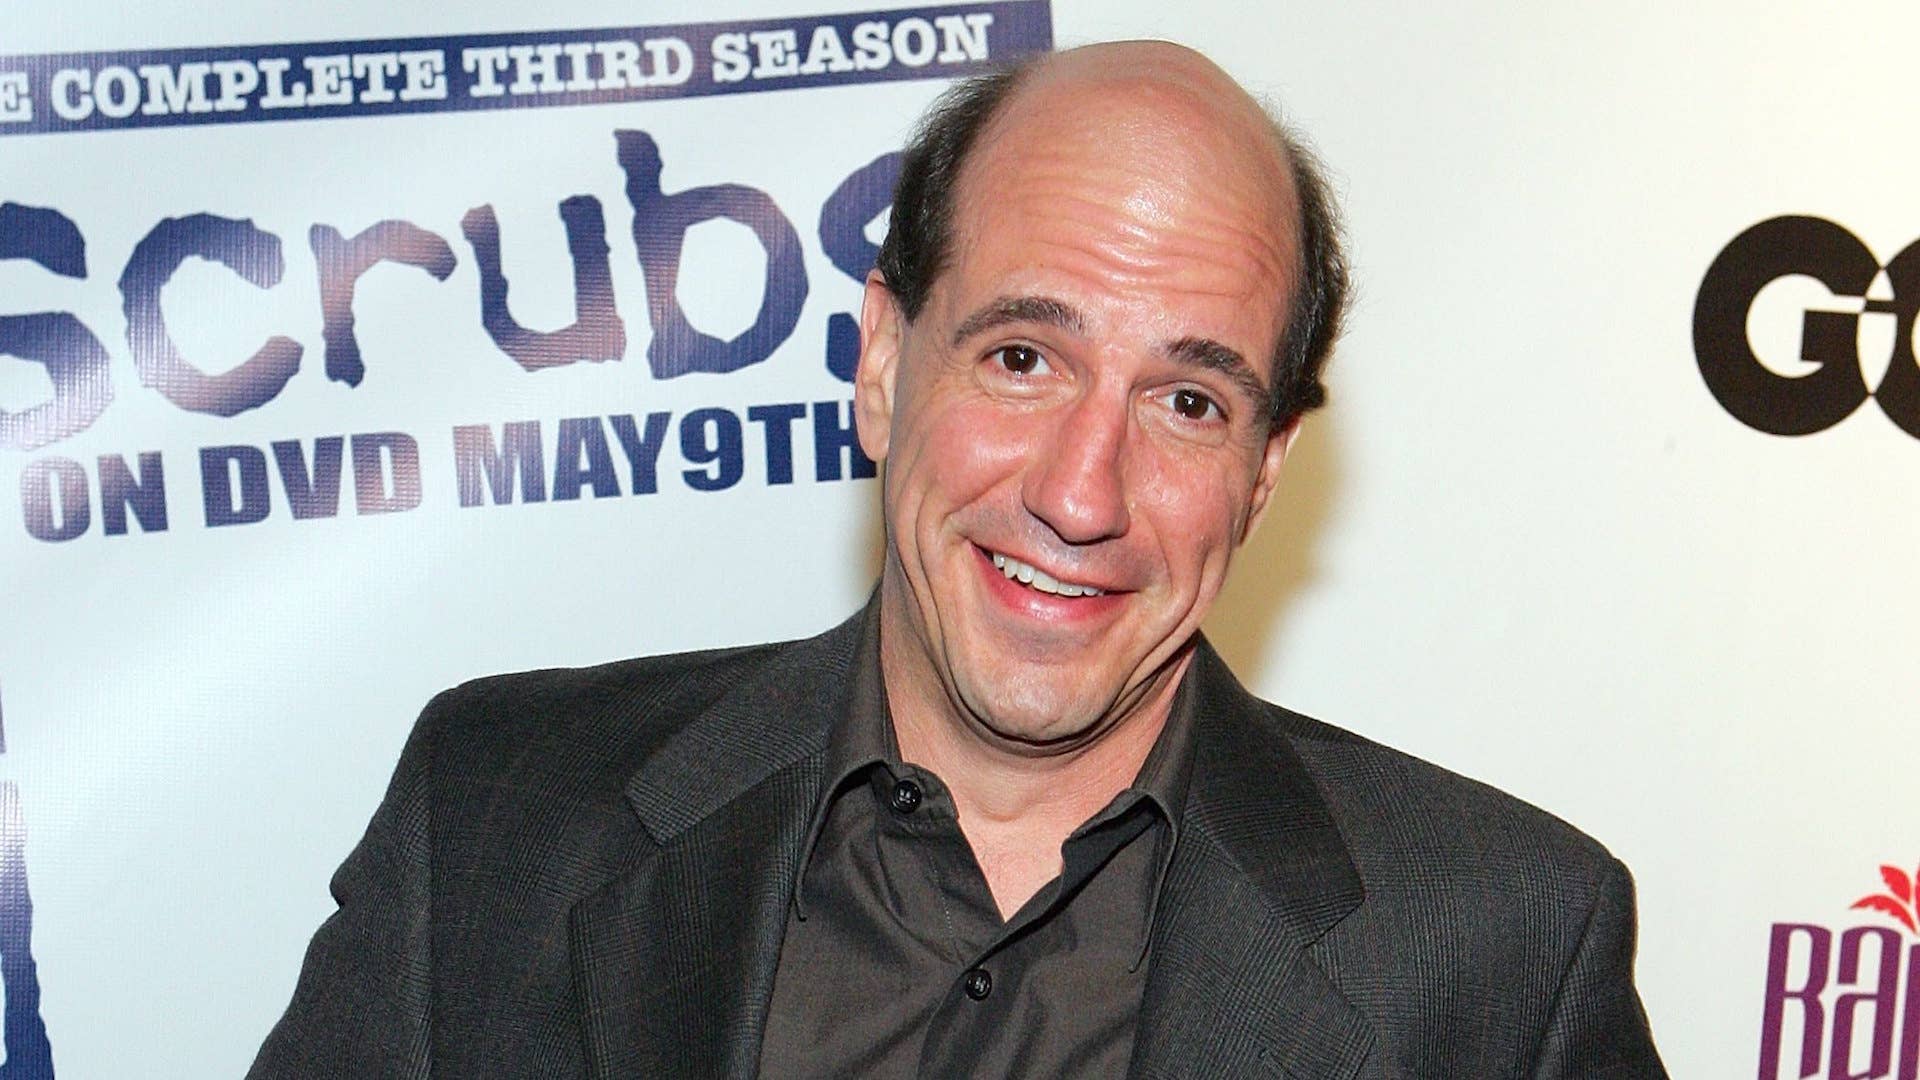 Sam Lloyd arrives at a third season DVD launch event and season five wrap party for "Scrubs."